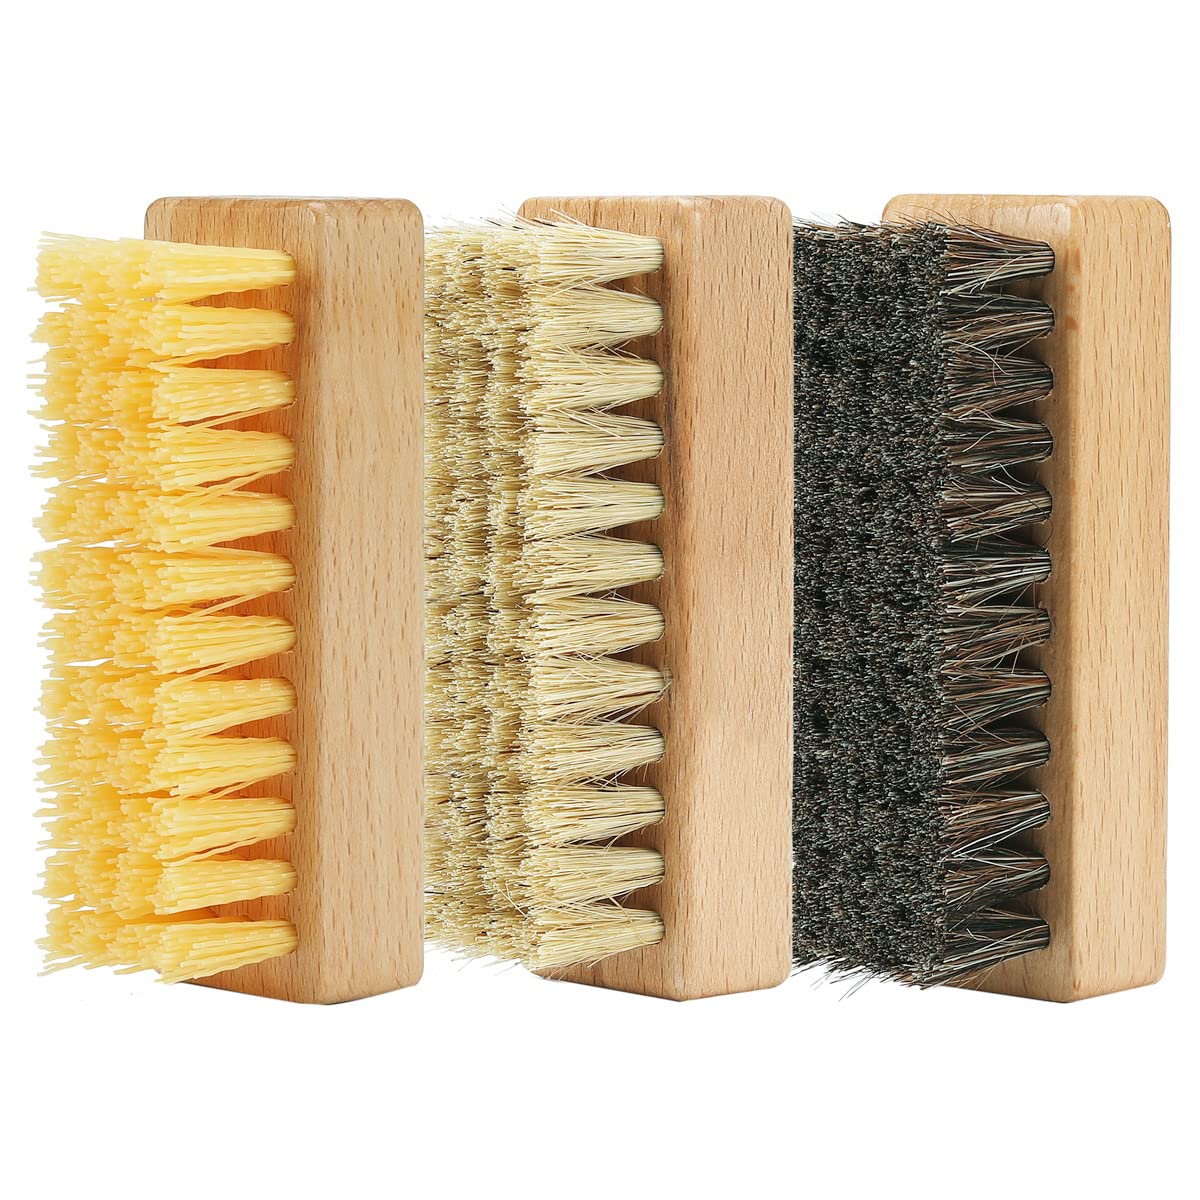 Shoe Cleaning Brush Set with Nylon Boar and Horsehair Bristles Wooden  Sneaker Cleaner Brush for Leather Suede Canvas Textile Bags and Accessories  - 3 Pack 3 Horsehair + Boar + Plastic bristle